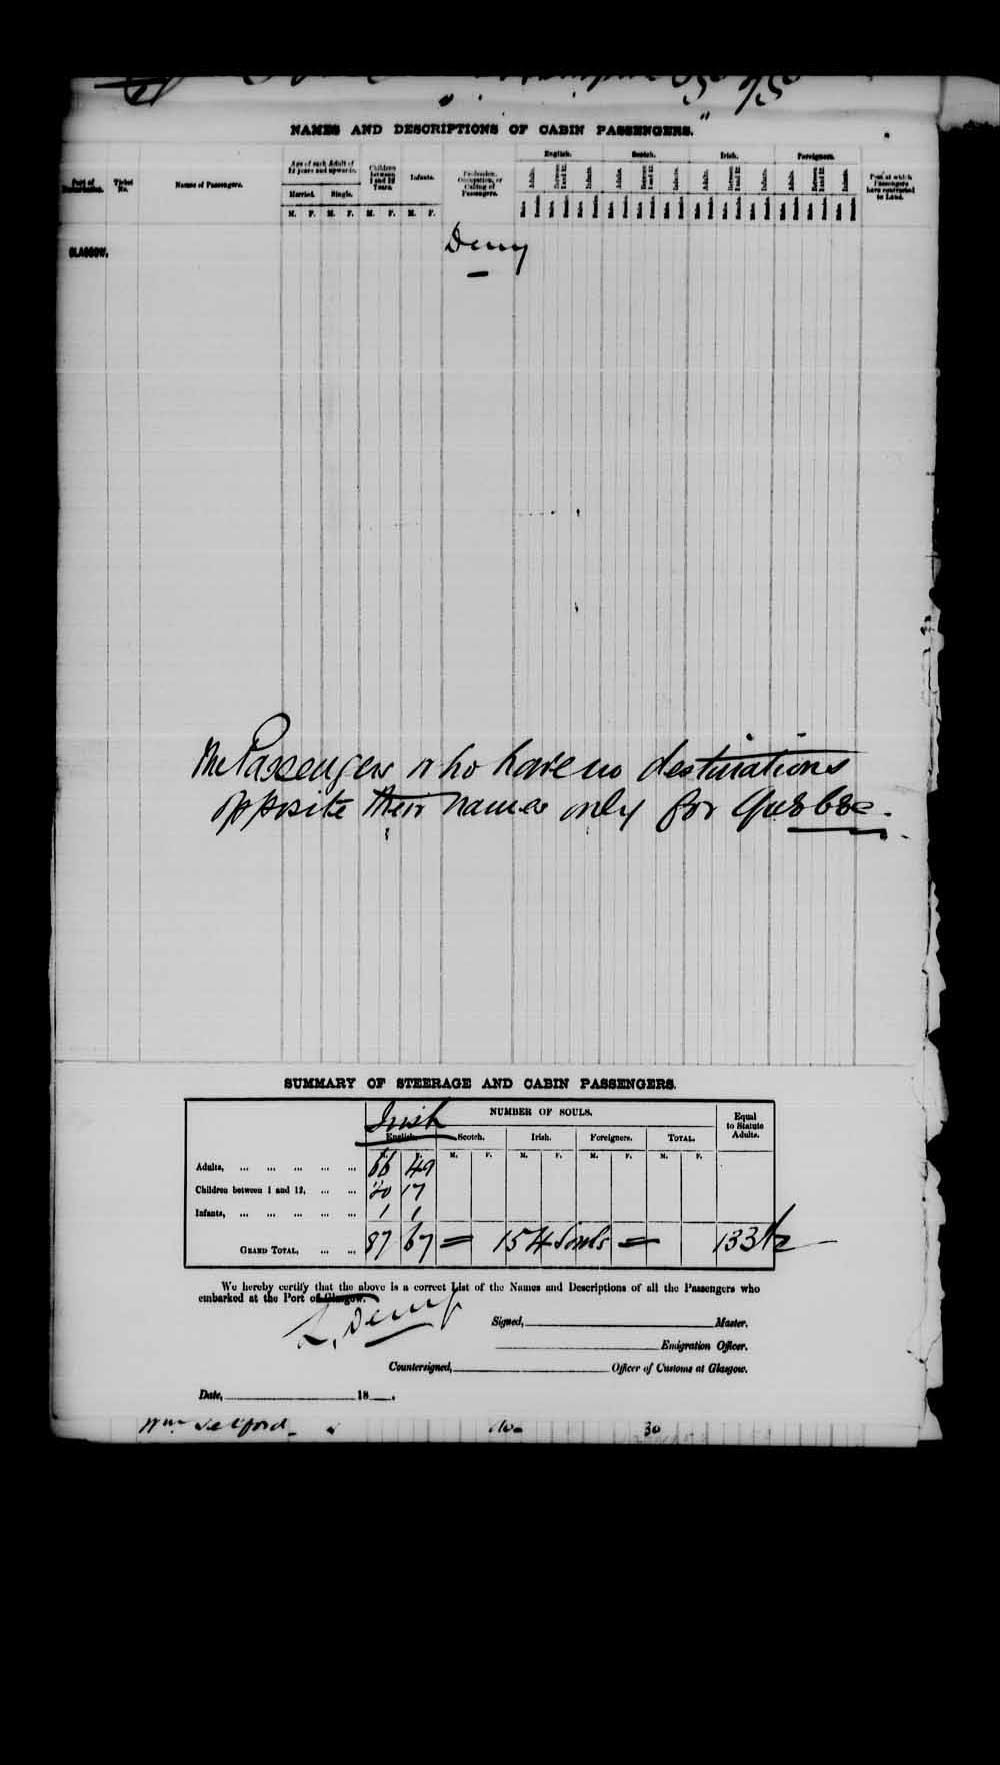 Digitized page of Passenger Lists for Image No.: e003542673